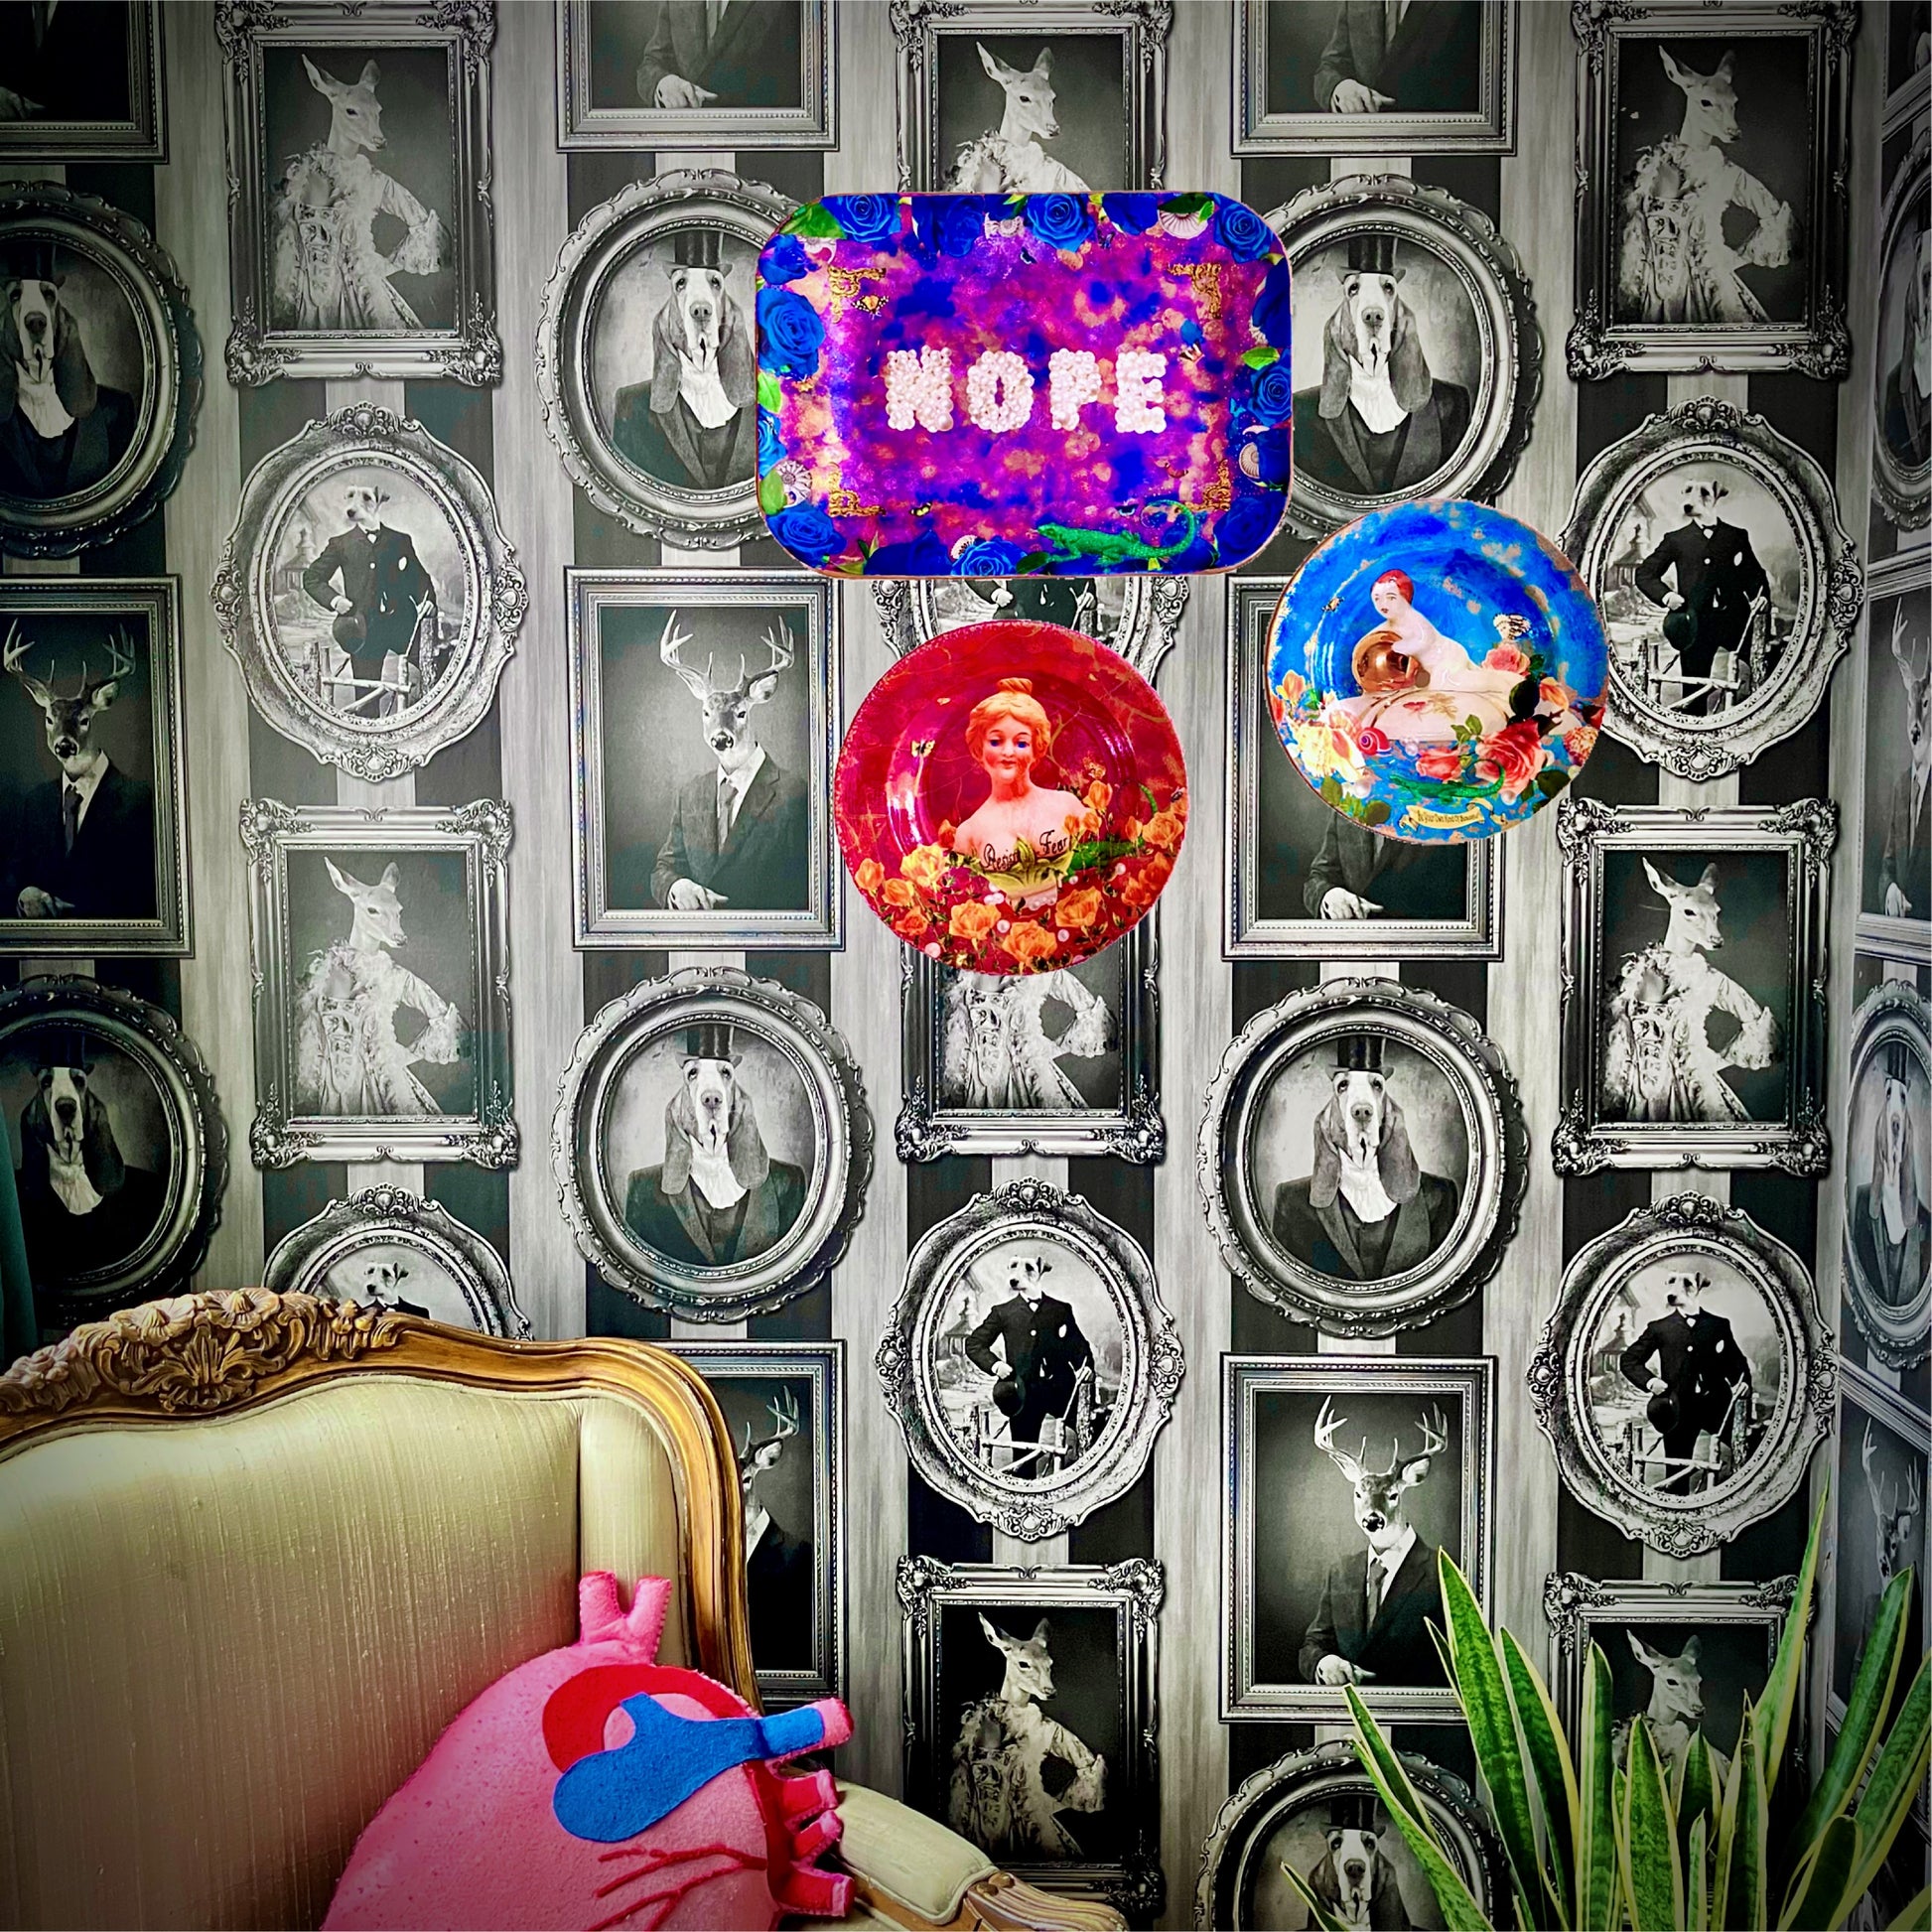 "Nope" Wall Plate by House of Frisson. Featuring the word "nope" written with pearls, framed by blue roses, shells, moths, and a lizard, on a  purple, blue and golden background. Lifestyle photo of plate on wall with other plates.